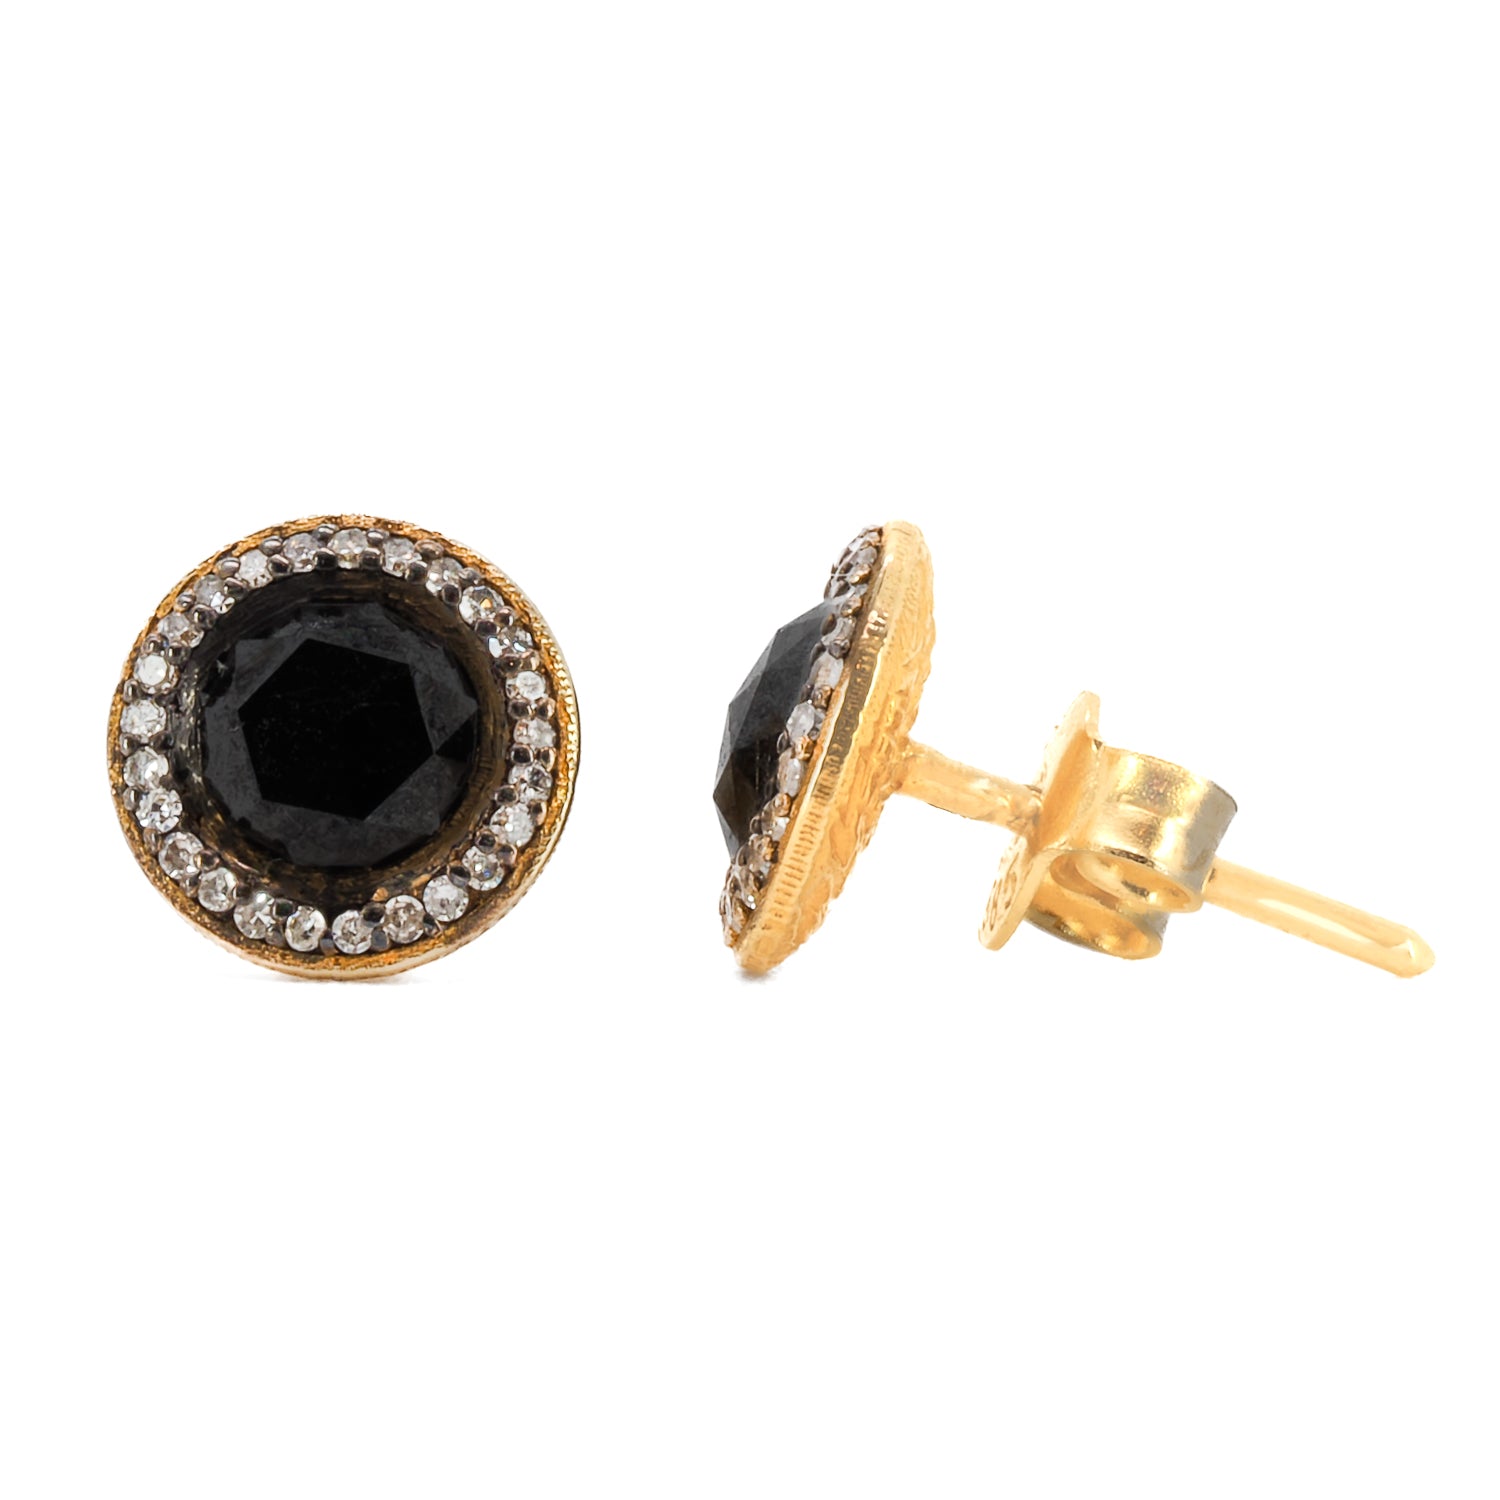 Delicate and meaningful, the Mini Black Rose Cut Stud Earrings are a timeless addition to any jewelry collection.